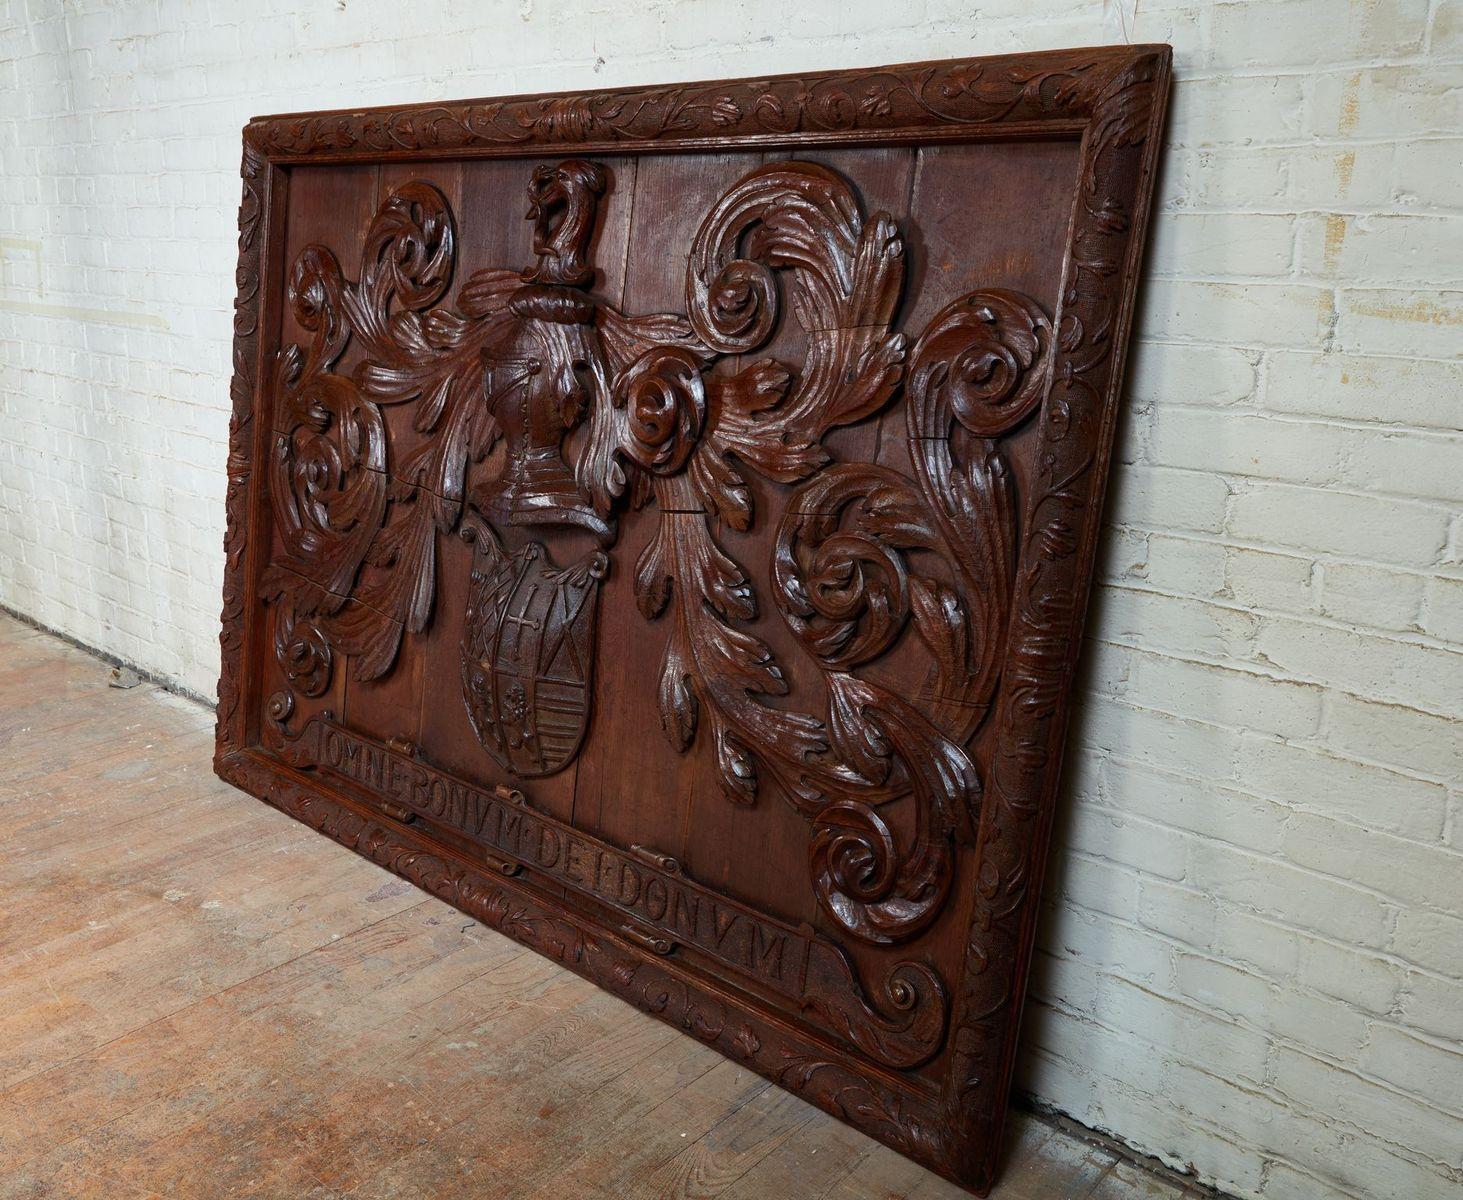 Rare and impressive early 18th century coat of arms, the whole carved in oak, the frame with relief carved strapwork on punched and worked ground surrounding coat of arms with foliate flourishes centered by a shield having a unicorn over a helmet